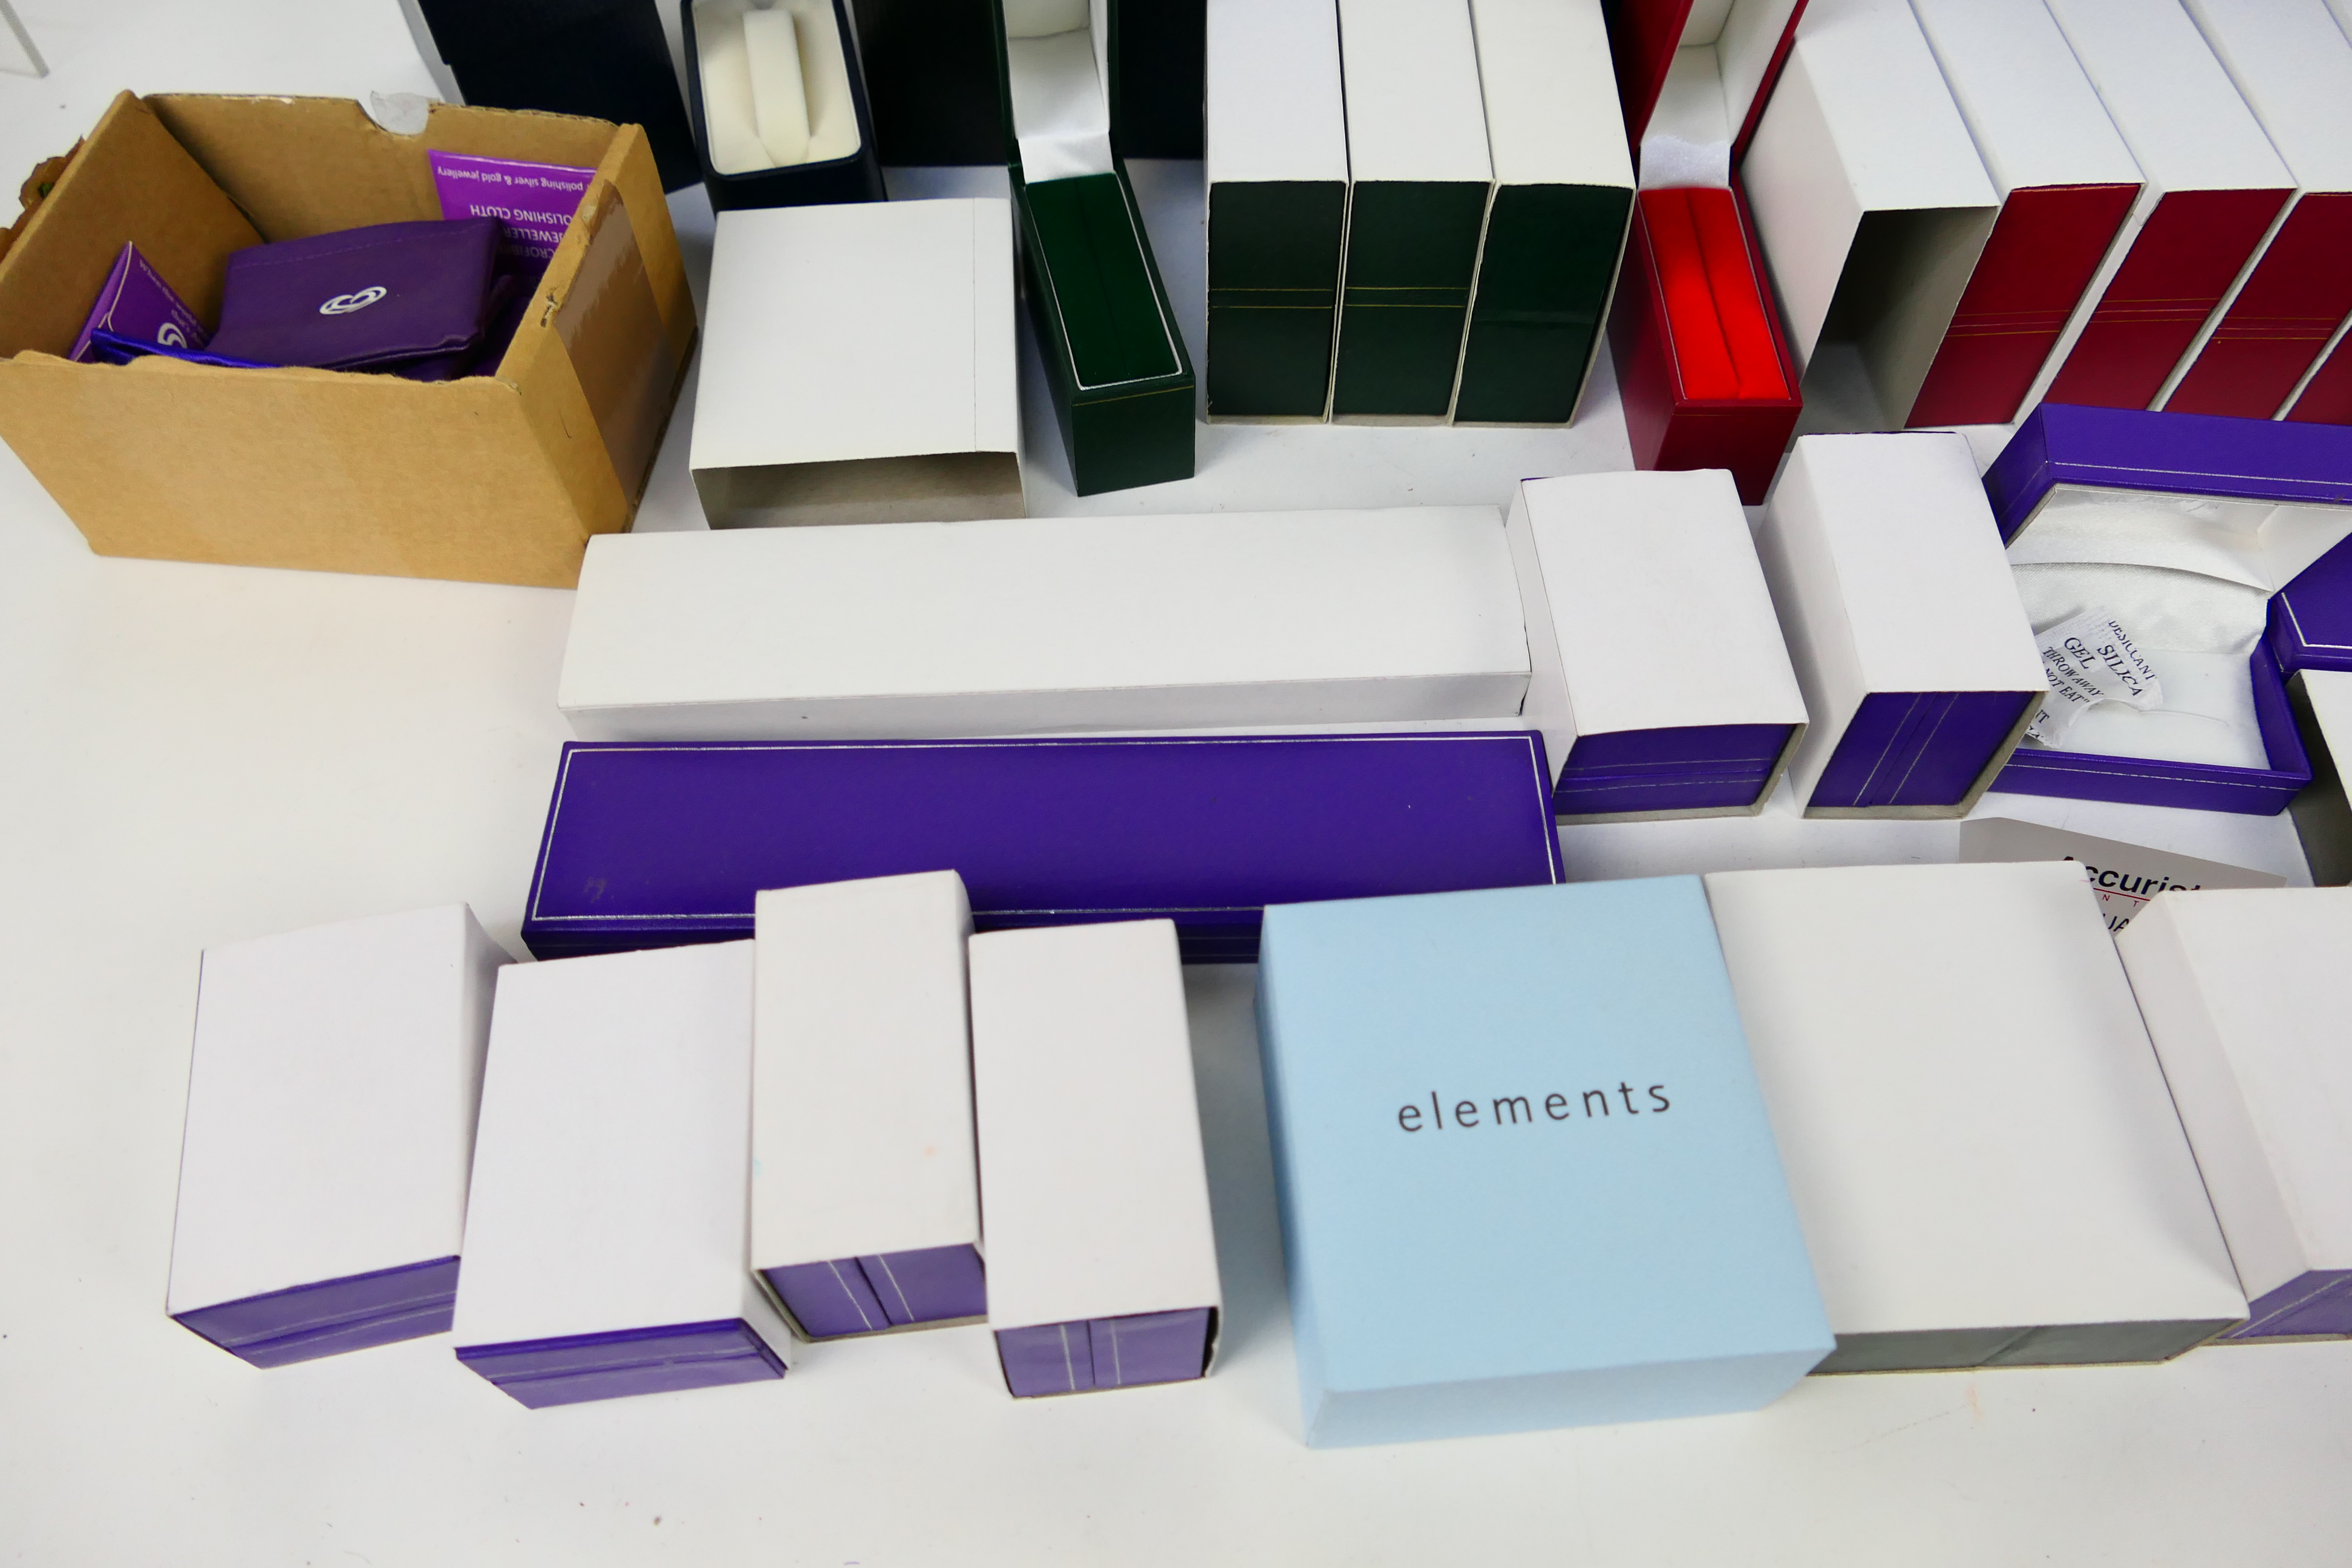 A collection of empty jewellery boxes. - Image 4 of 5